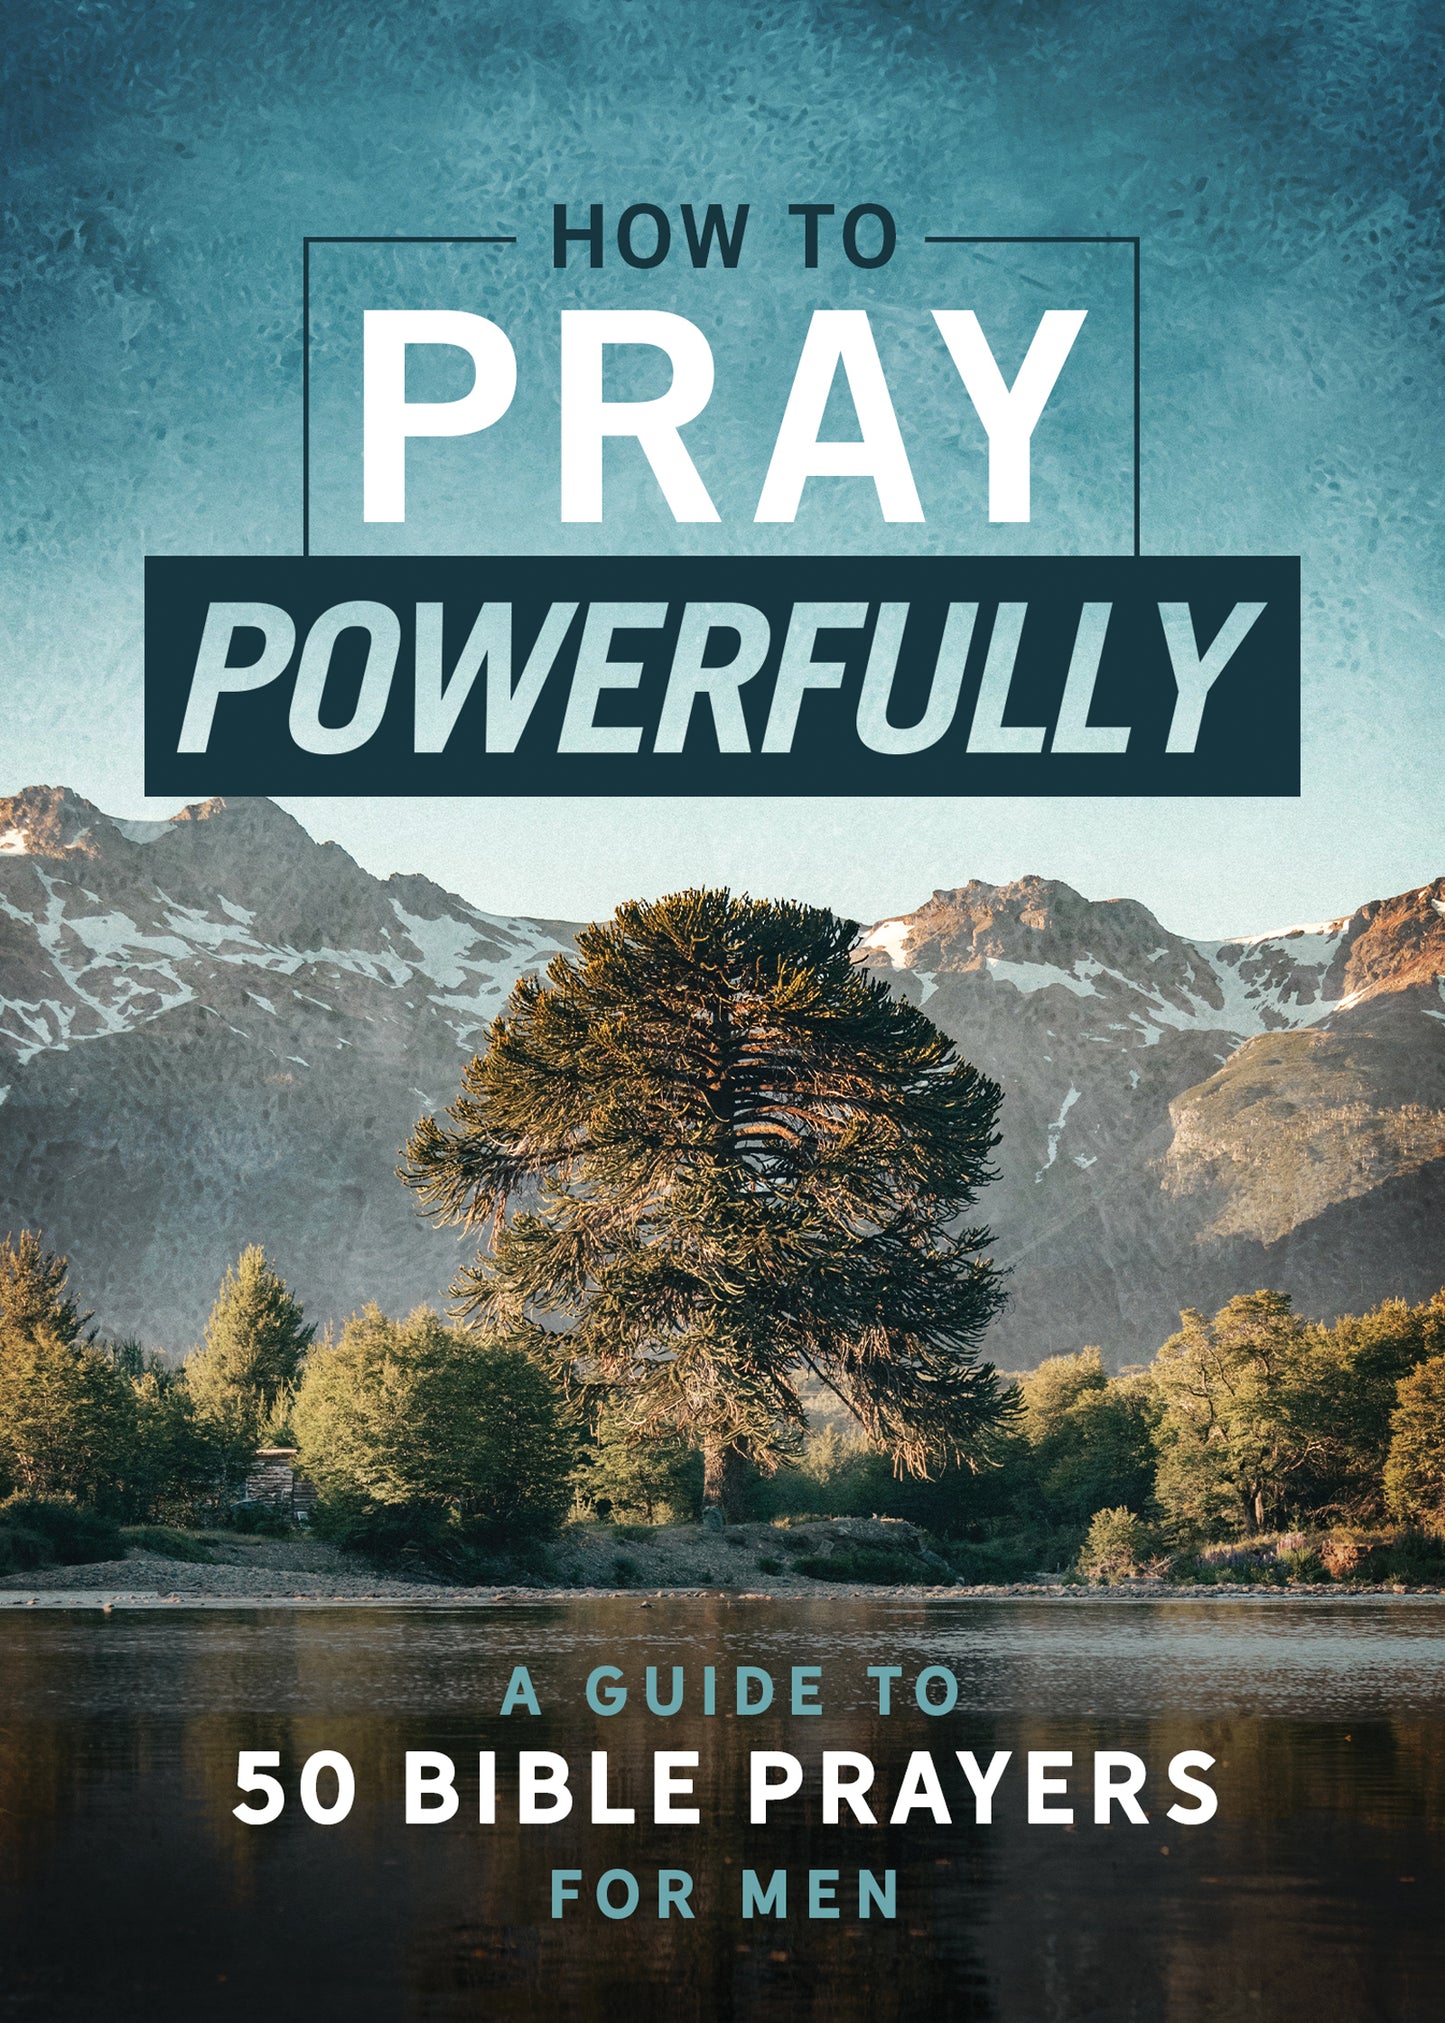 How to Pray Powerfully - The Christian Gift Company